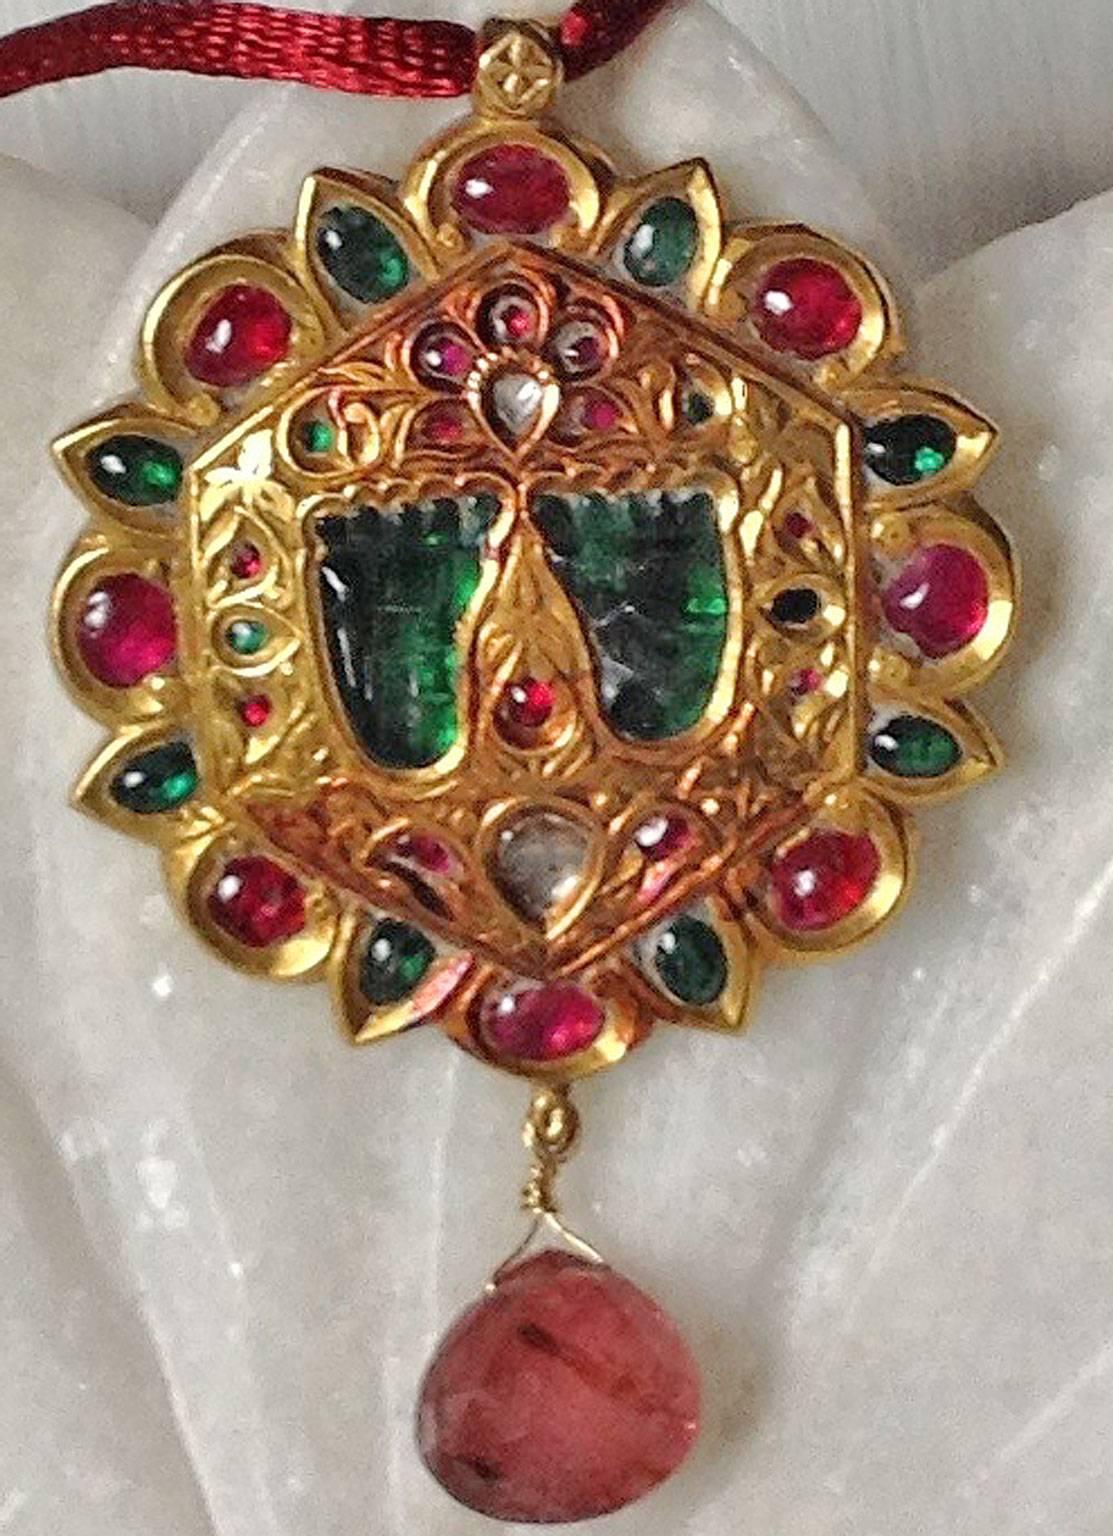 A charming hand made pendant created using traditional Rajasthani techniques. Flat cut foiled backed diamonds, natural rubies. The green stones are probably quartz which have been backed with green foil. The pendant features a delightful pair of 